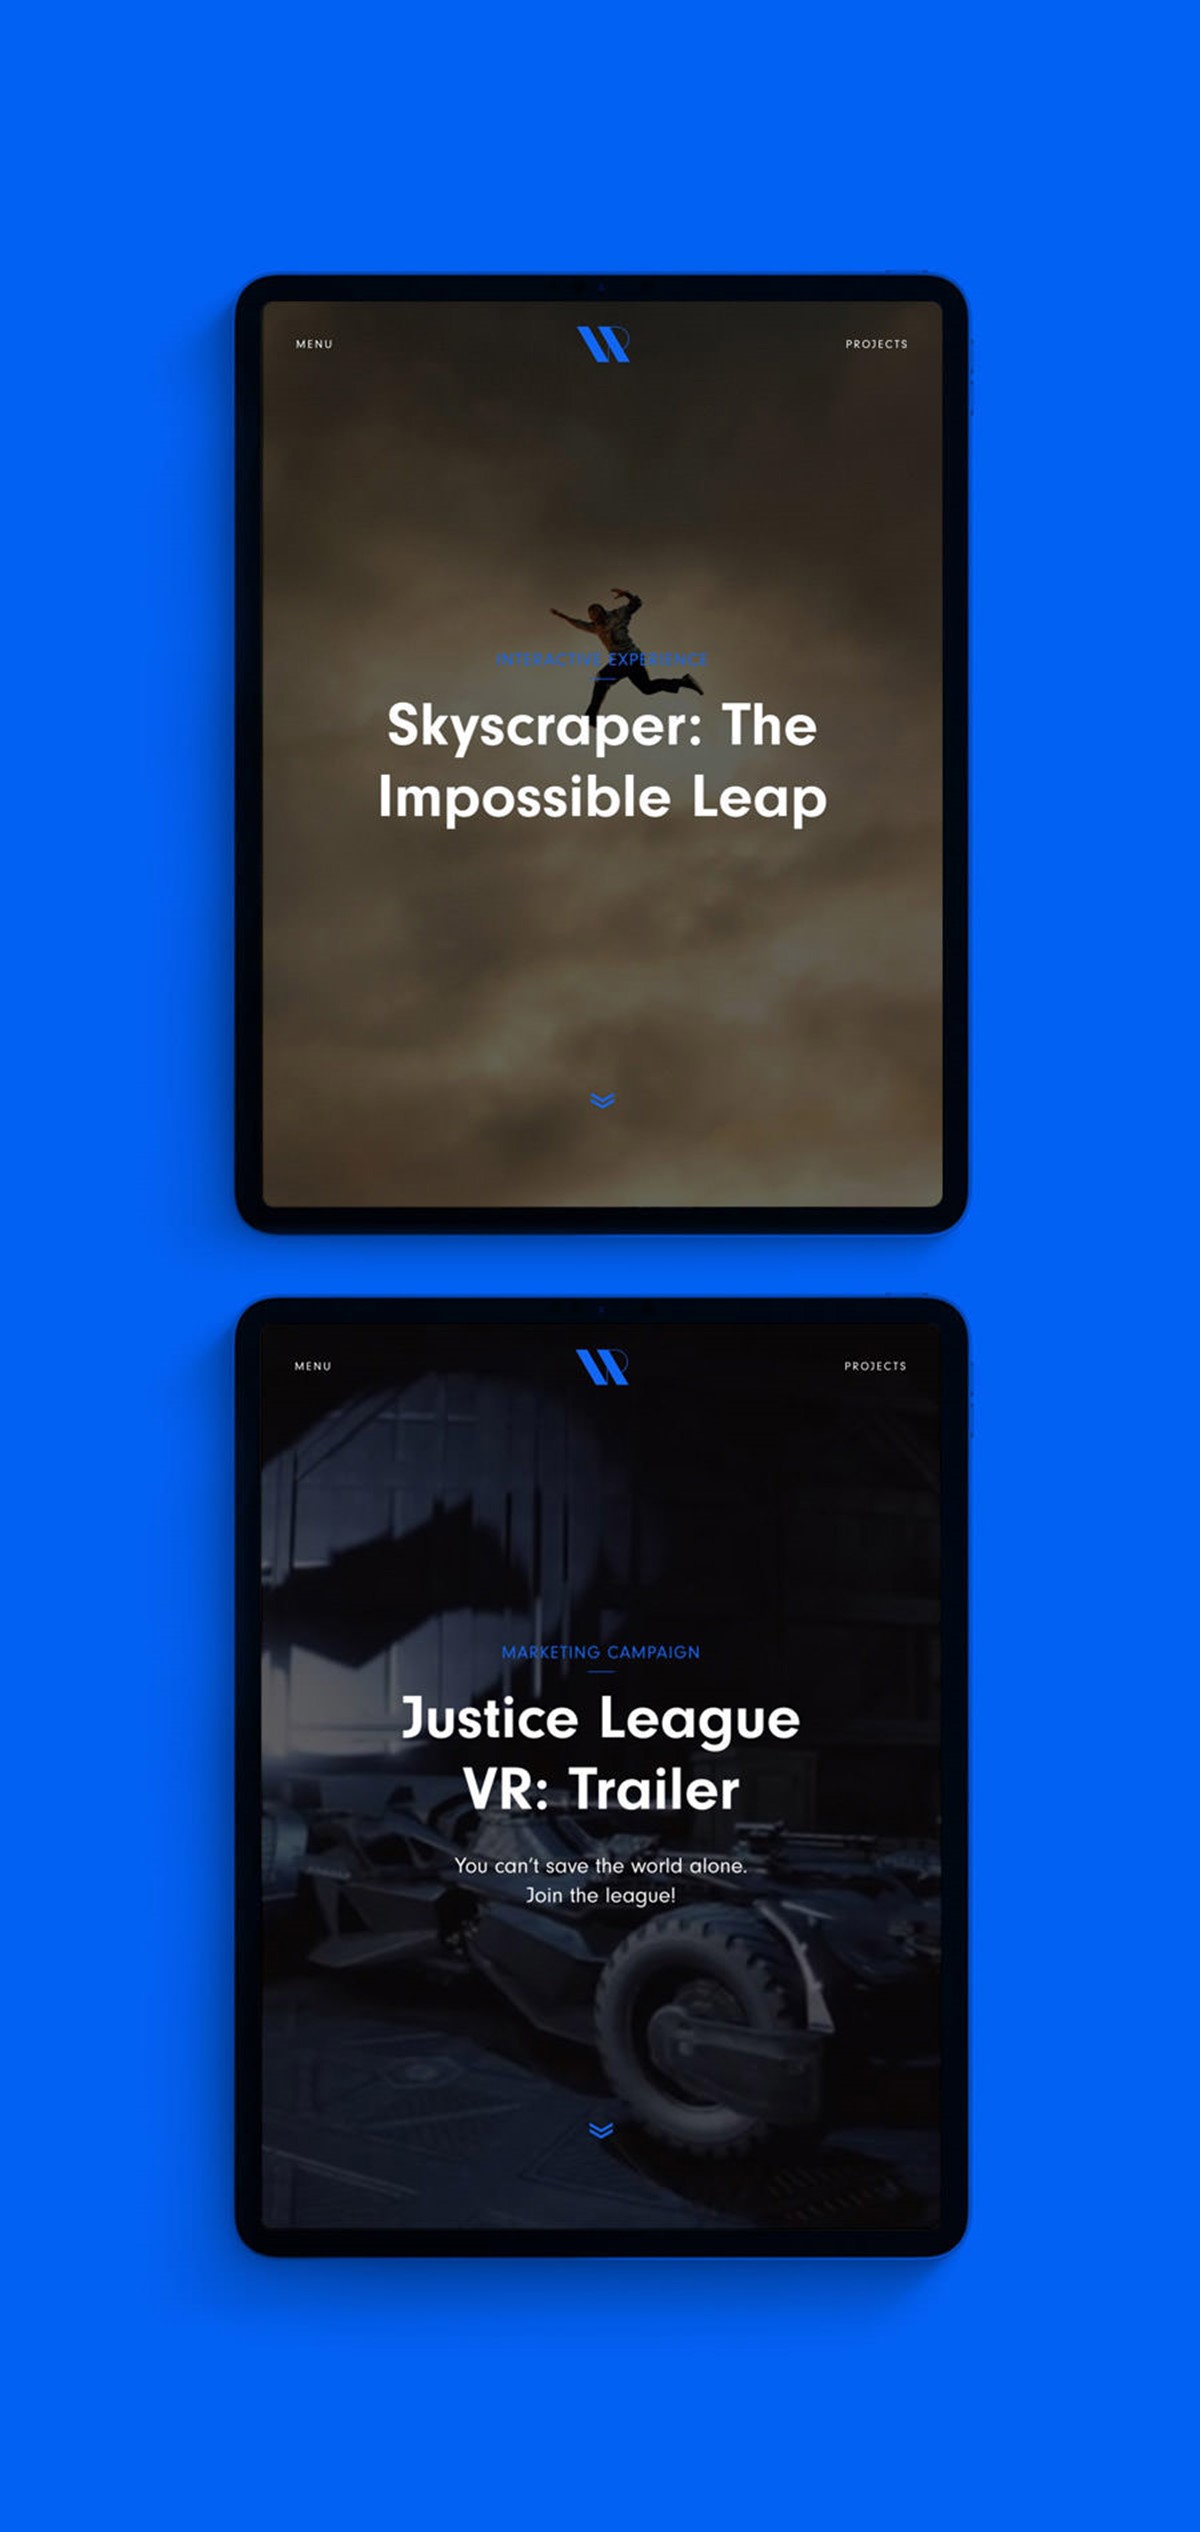 Create VR. Website designed by Superfried featured on iPads.